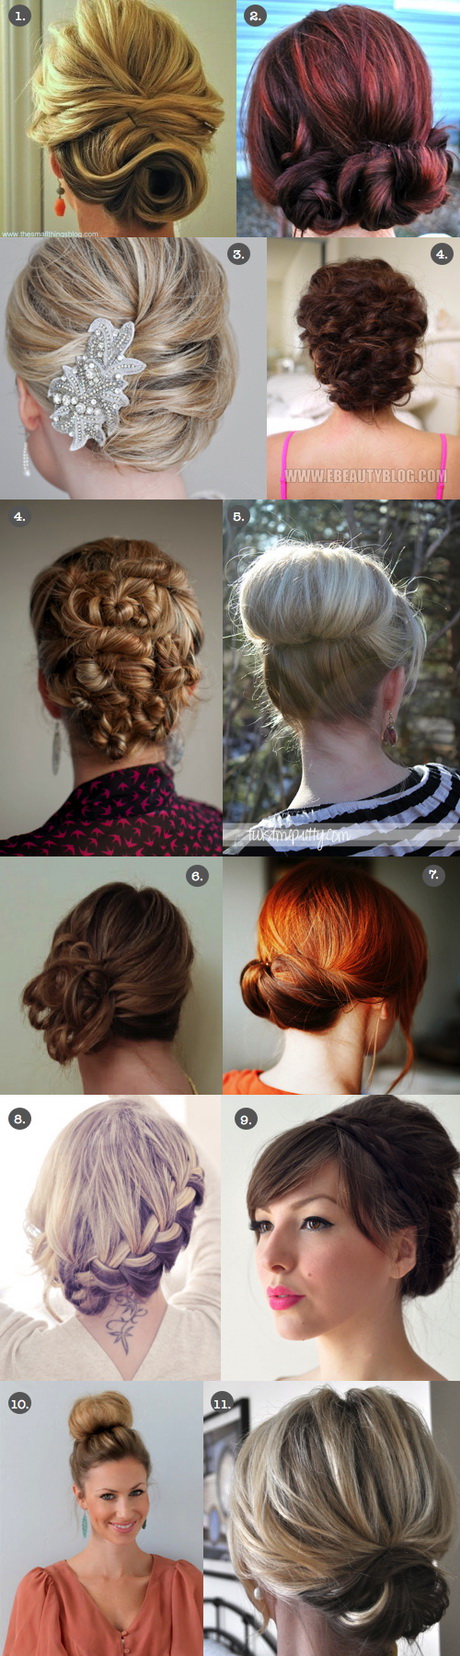 Prom hairstyles to do at home prom-hairstyles-to-do-at-home-68_9